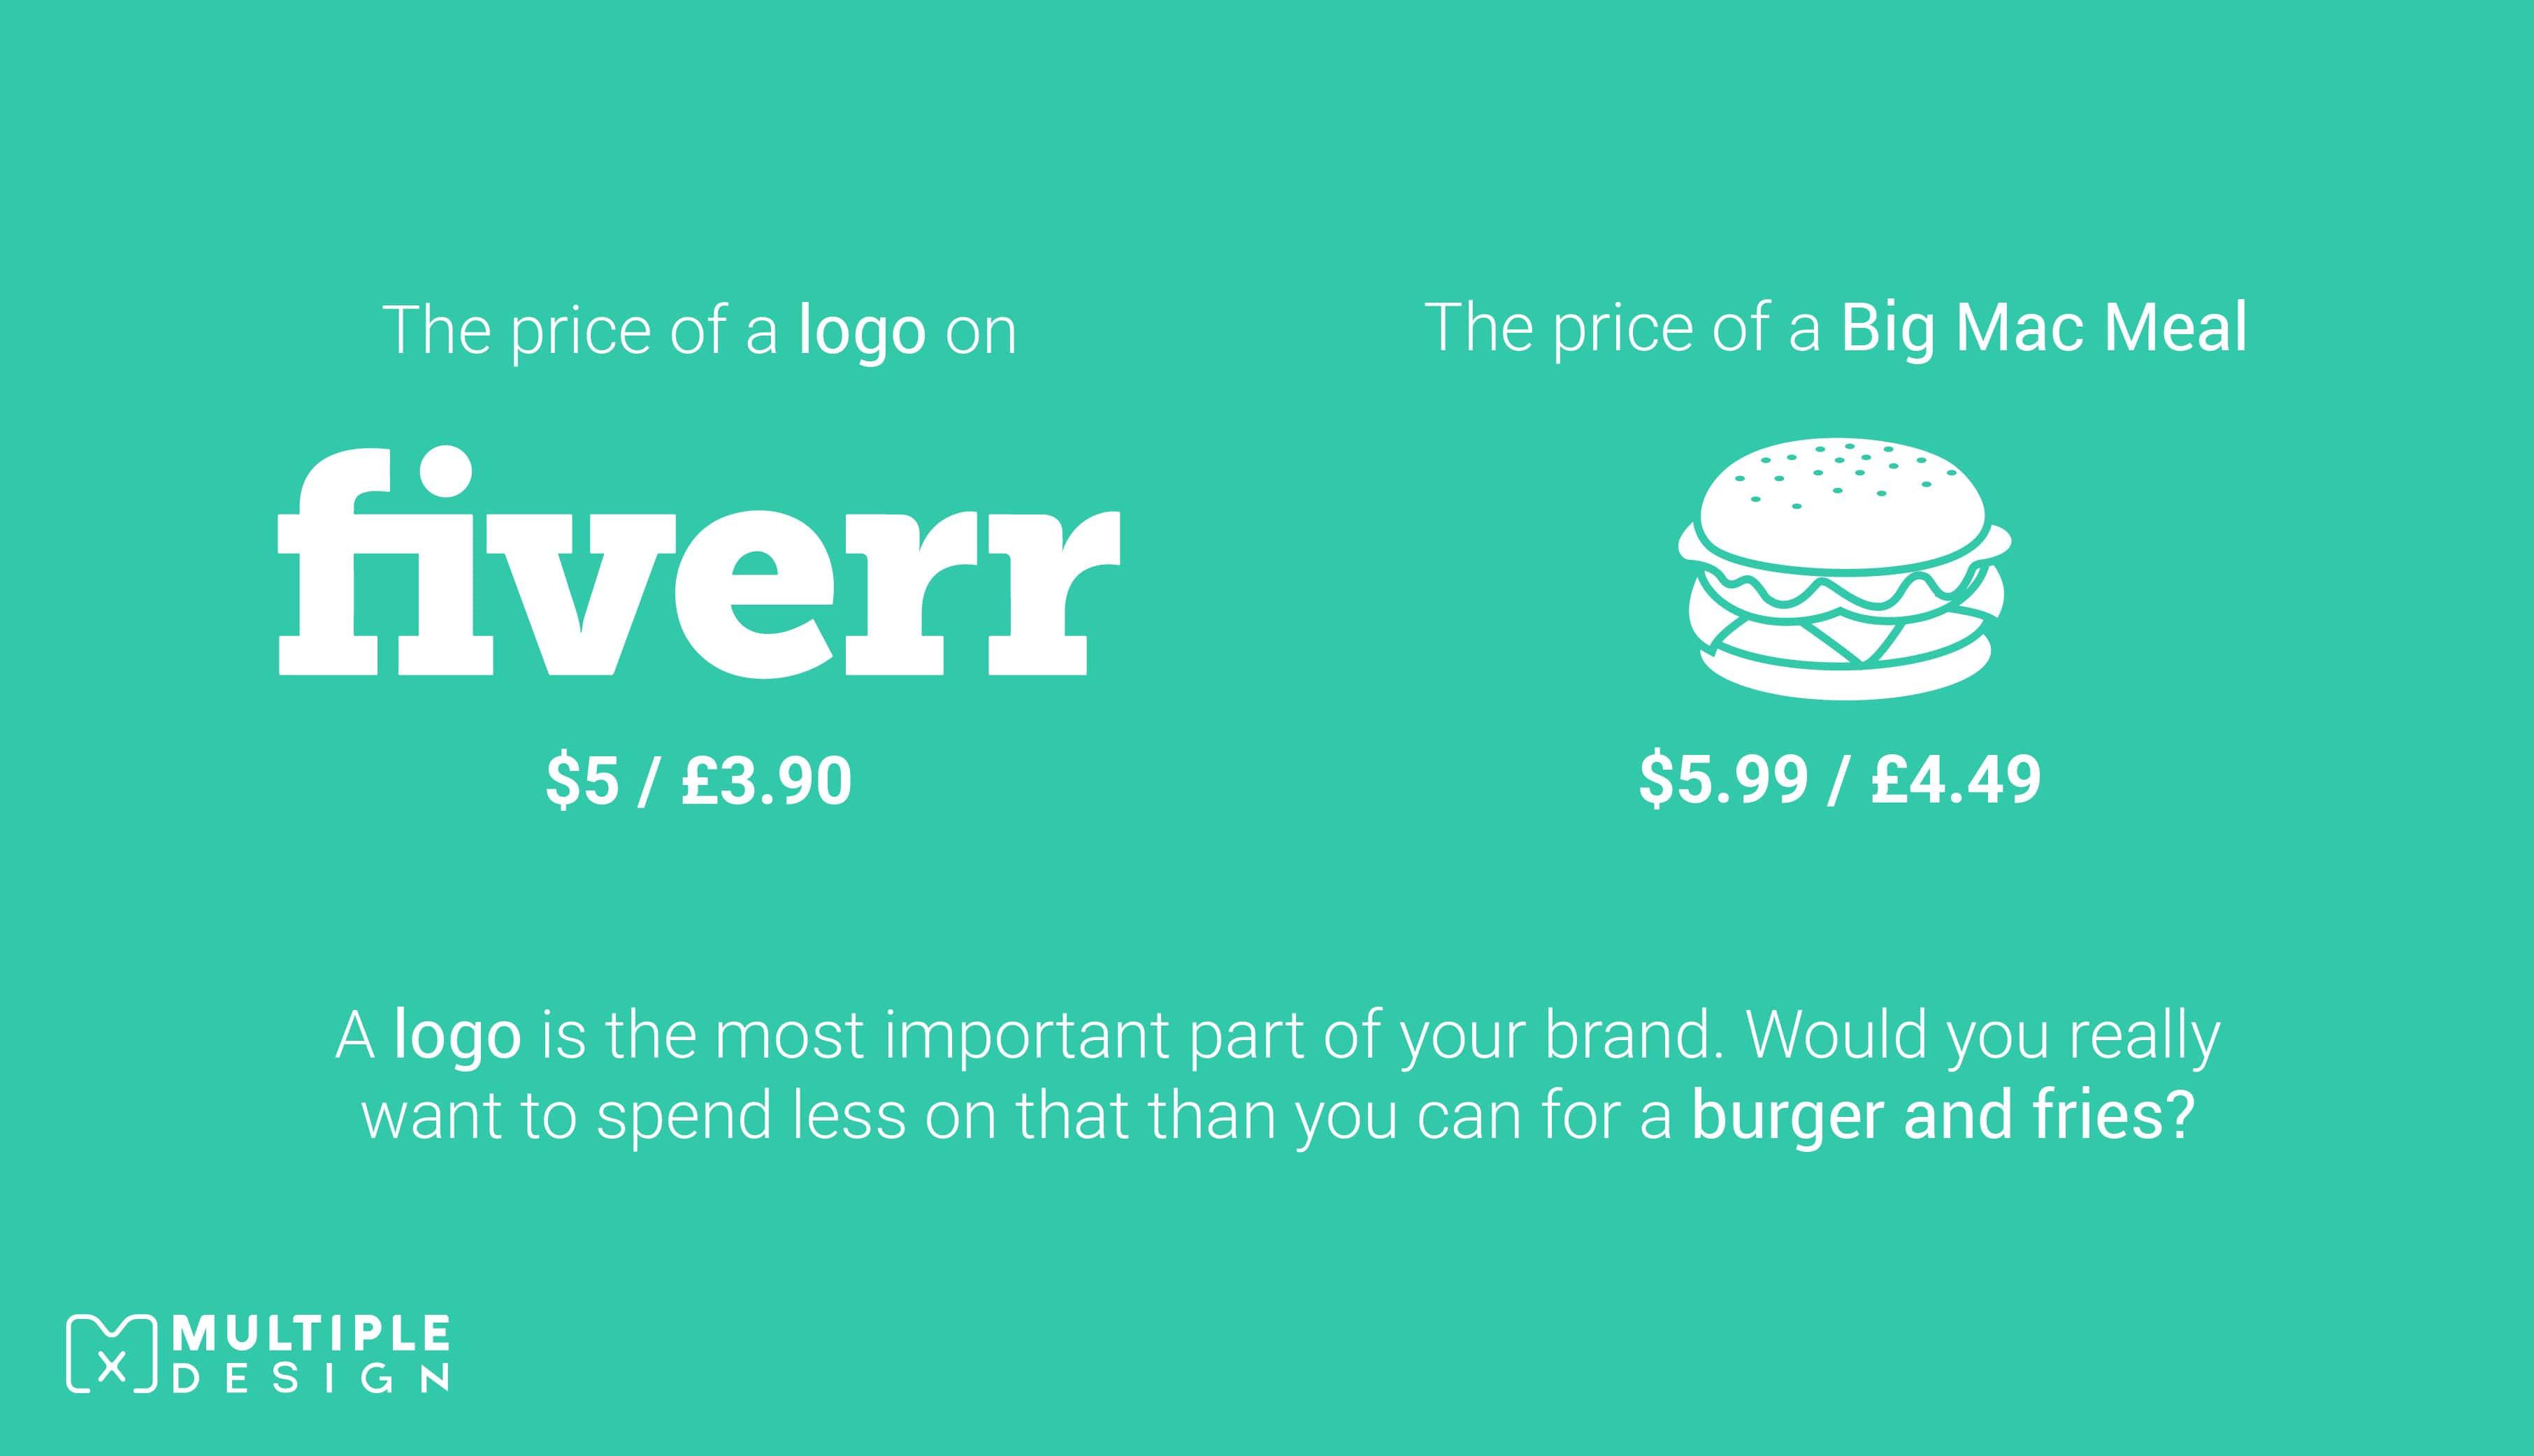 A logo is the most important part of your brand. Would you really want to spend less on it than you can for a burger and fries?